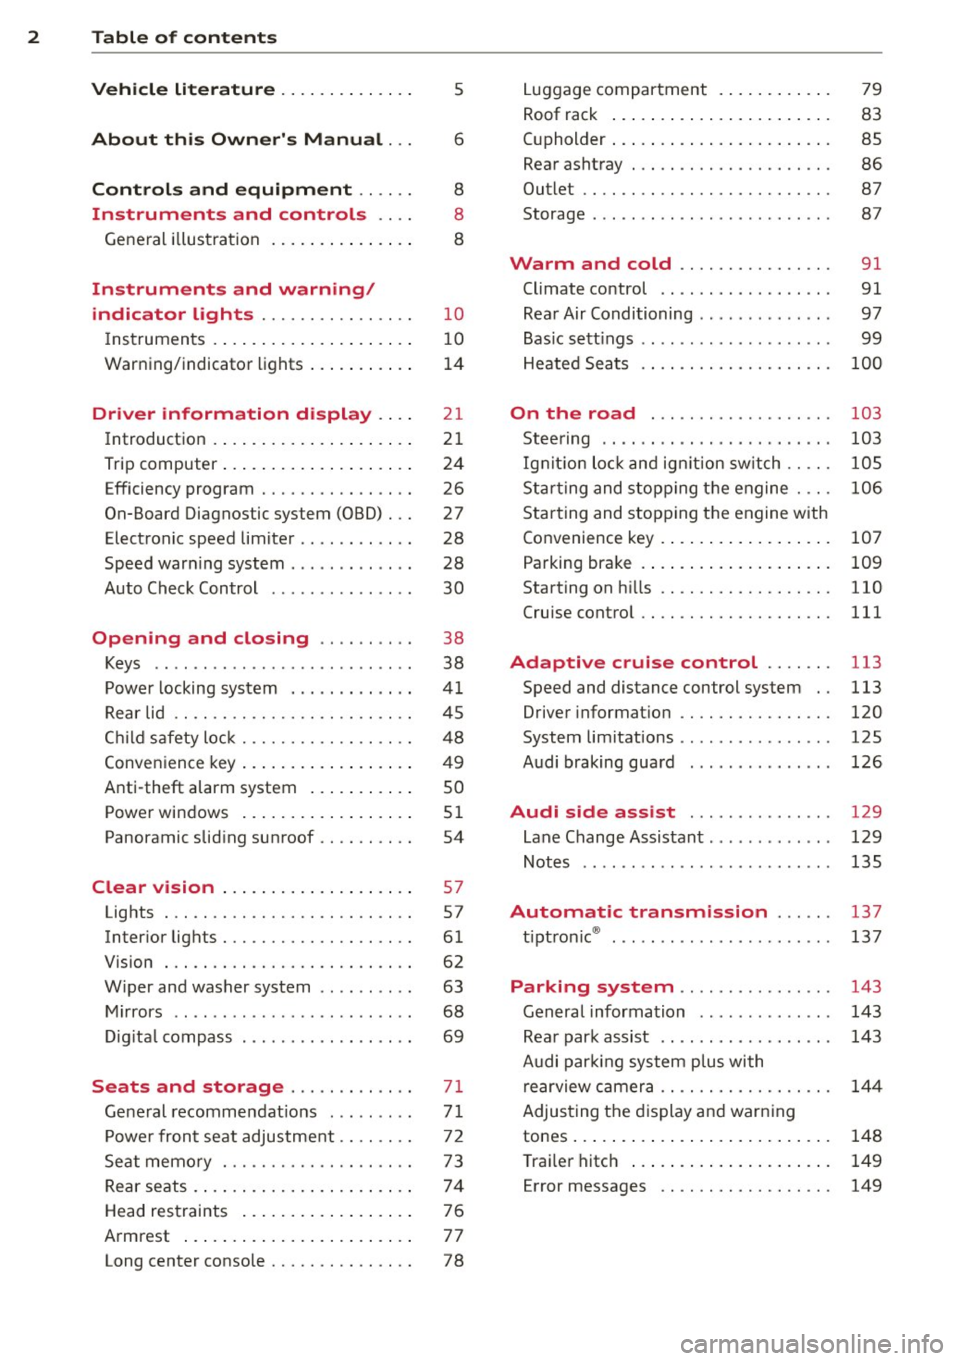 AUDI Q7 2012  Owner´s Manual 2  Table  of  contents Vehicle  literature  .. .. .. .. .. ... . 
About  this  Owners  Manual  ... 
Controls  and  equipment  .. ...  . 
Ins truments  and  controls  .. . . 
General  illus tration  .